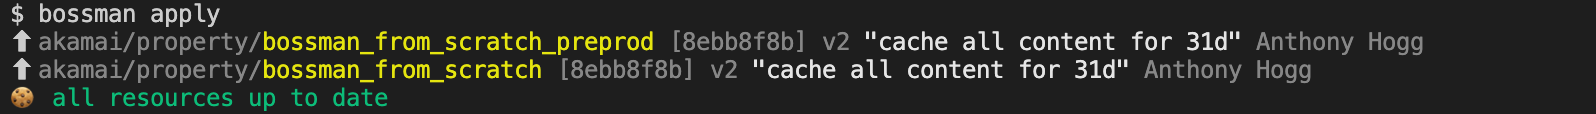 ../../_images/apply_caching.png